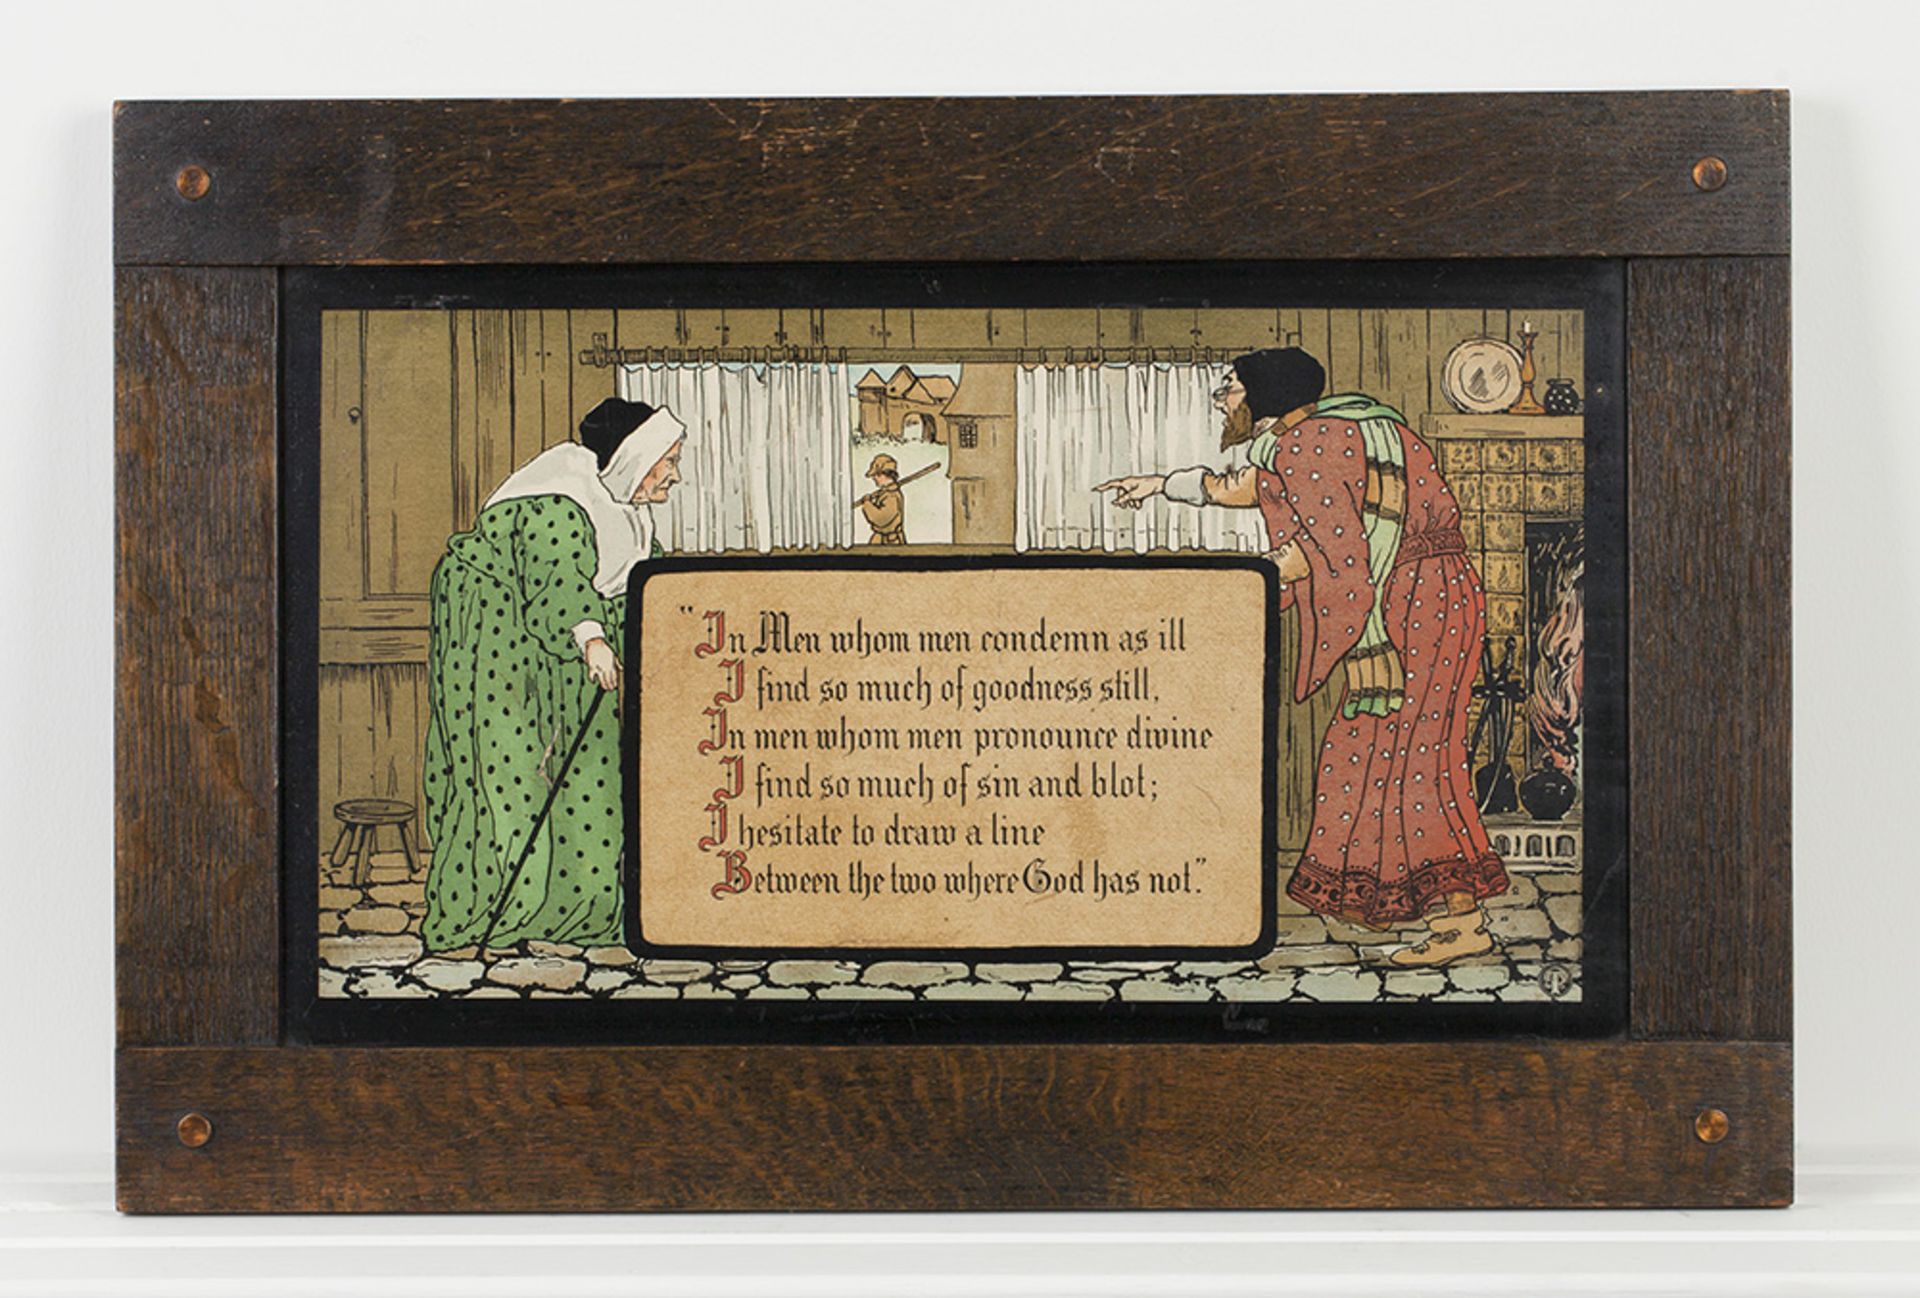 Taber & Prang Print On Board With Joaquin Miller Verse 1904 - Image 7 of 7